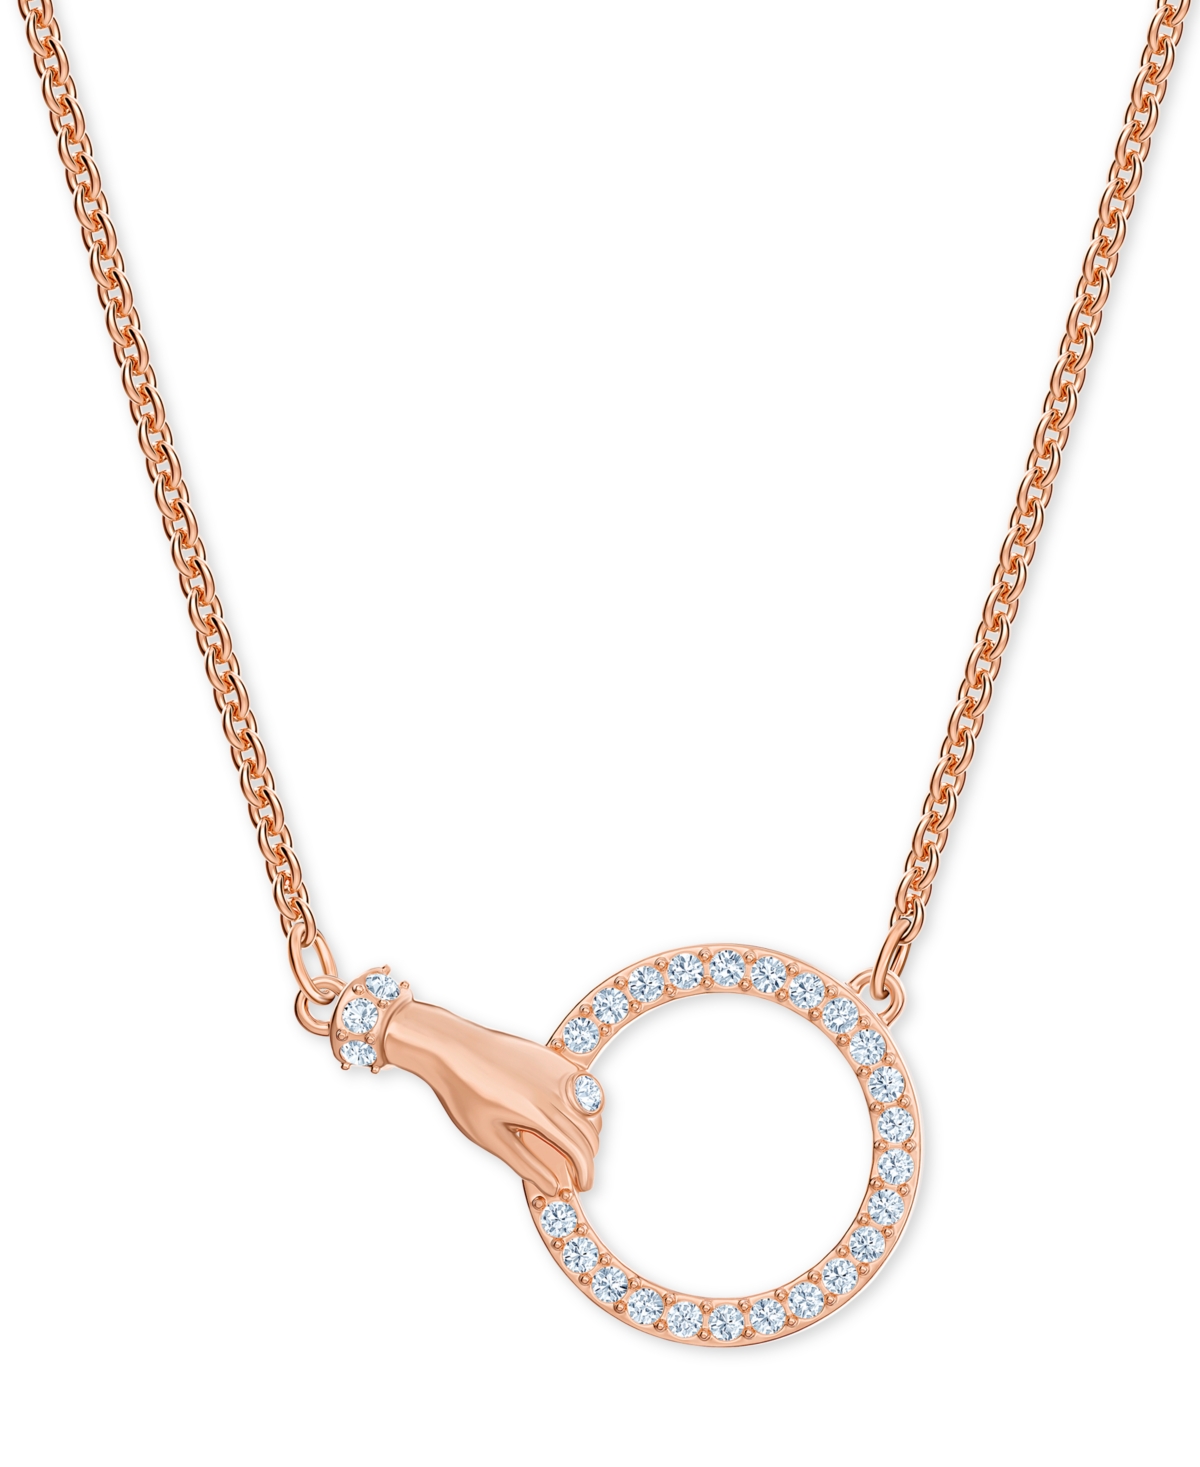 Rose Gold-Tone Crystal Hand & Ring Choker Necklace, 11-7/8" + 3" extender - White